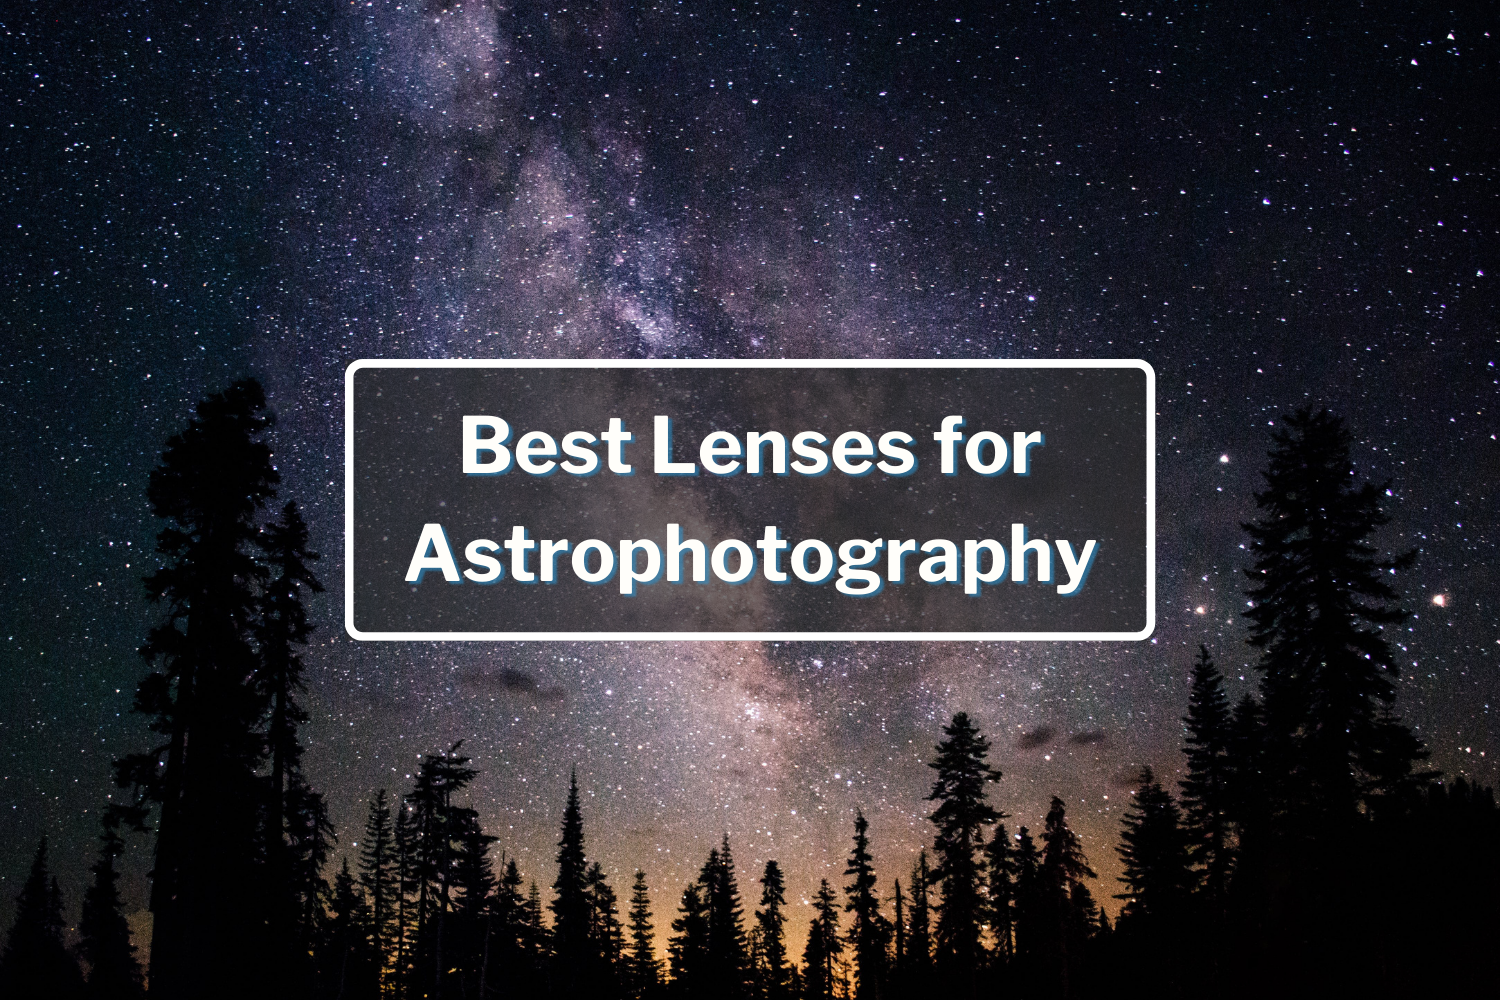 Best Lenses for Astrophotography